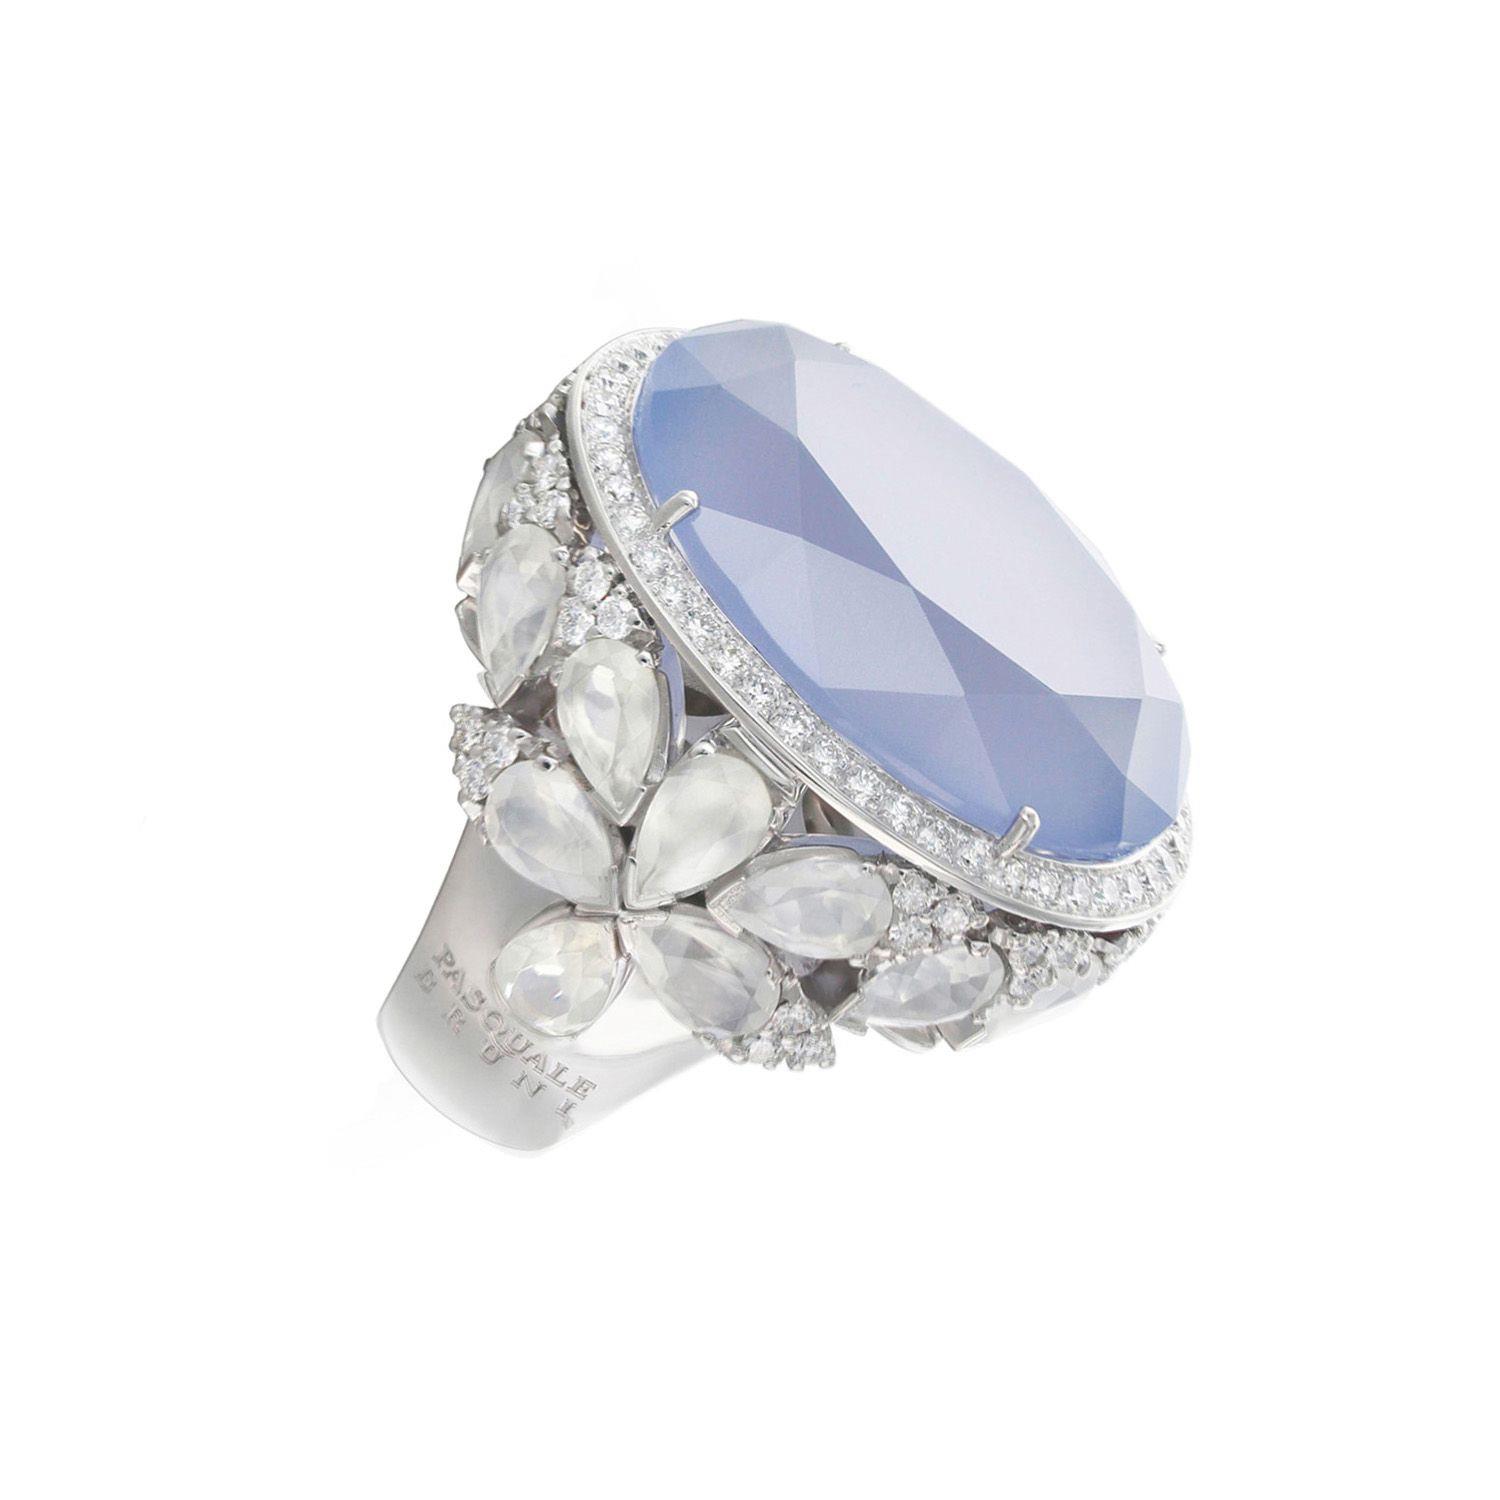 Garlanda ring in white gold with diamonds and stones - PASQUALE BRUNI